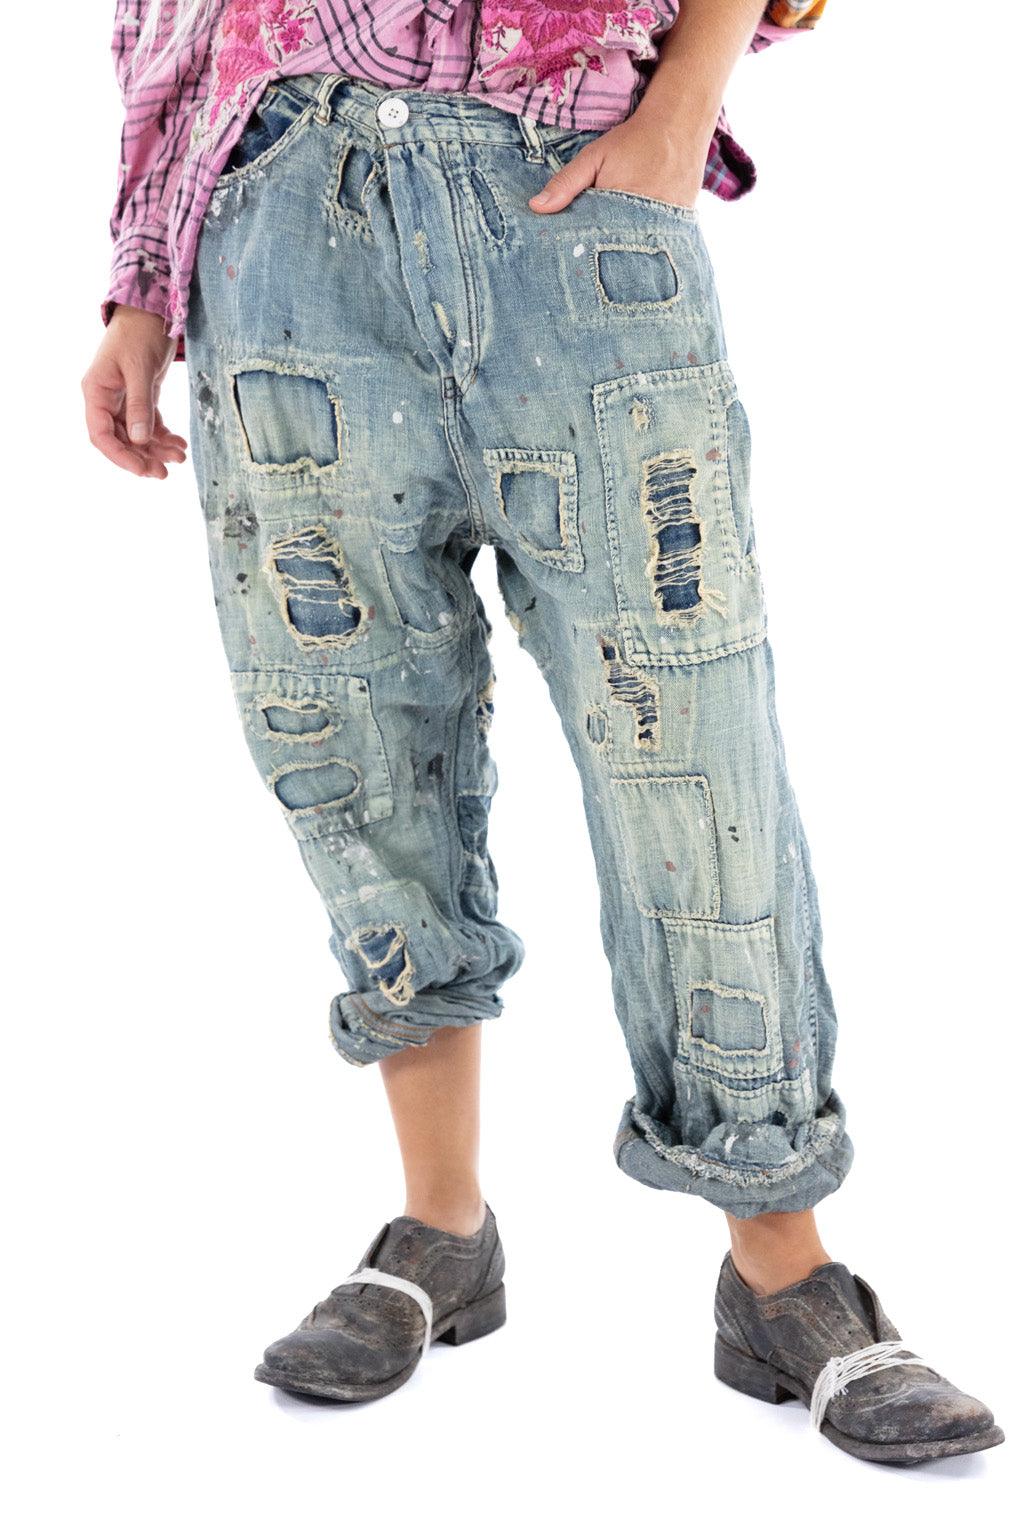 You Just Love Miner Denims - Magnolia Pearl Clothing